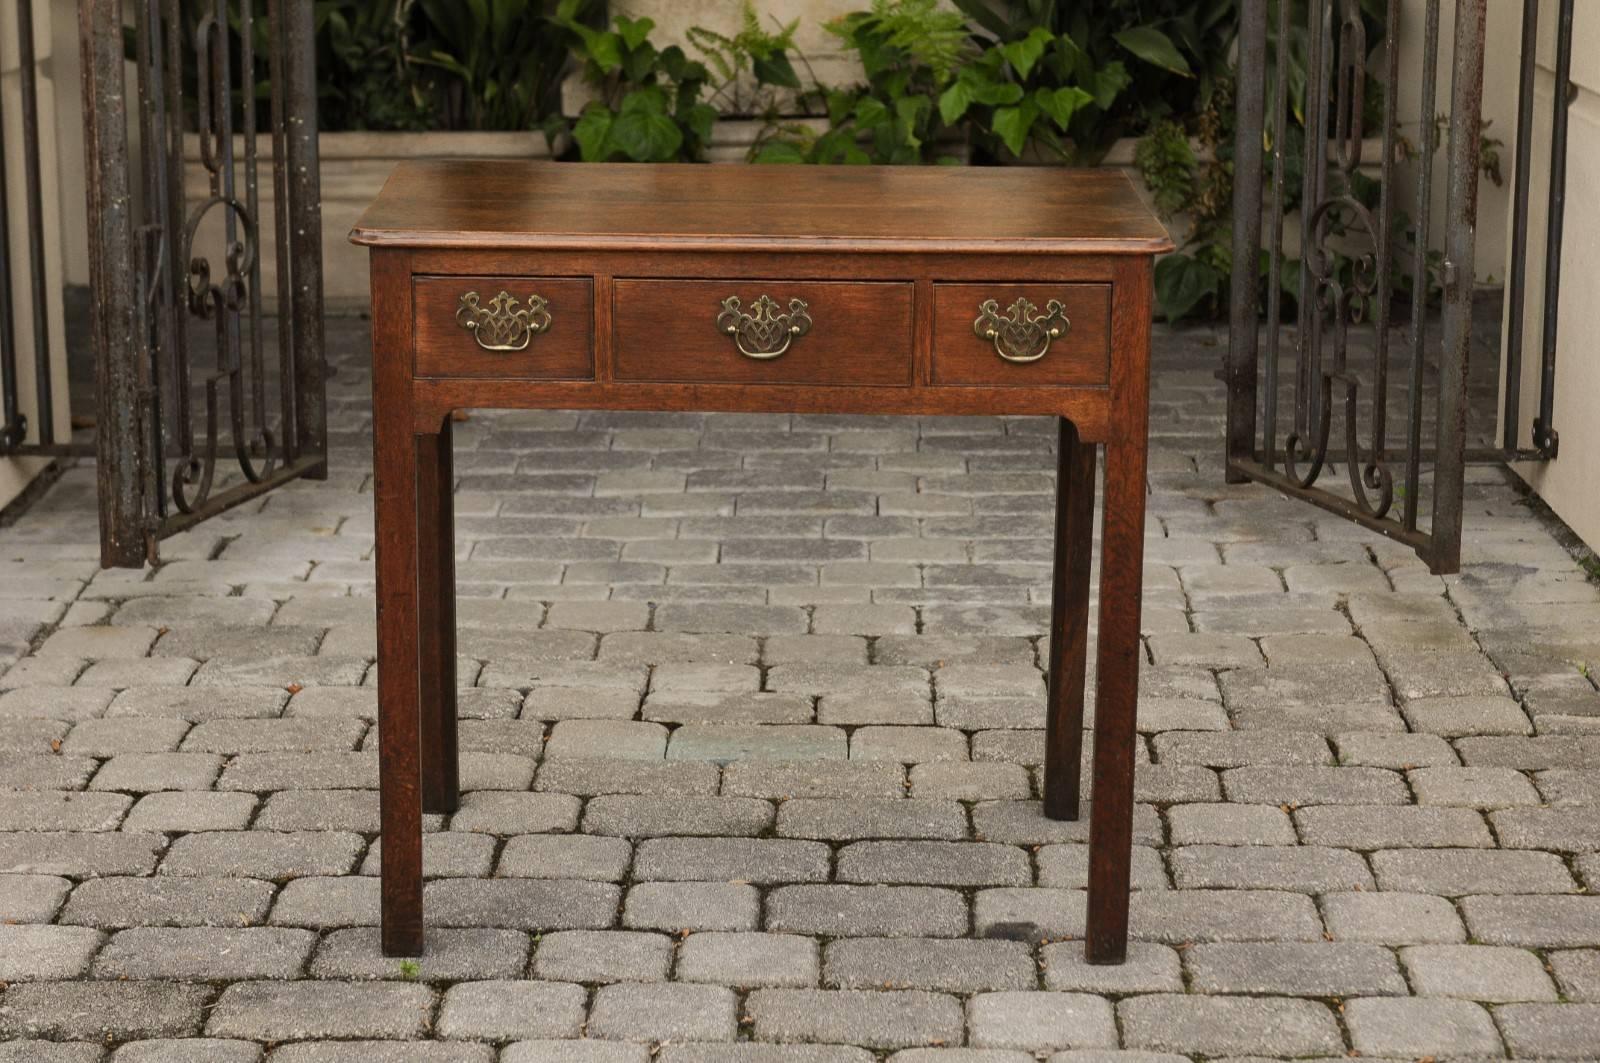 An English Georgian period oak side table from the late 18th century, with three drawers, chinoiserie hardware and Marlborough legs. This English oak side table features a rectangular planked top with molded edges and rounded corners in the front,